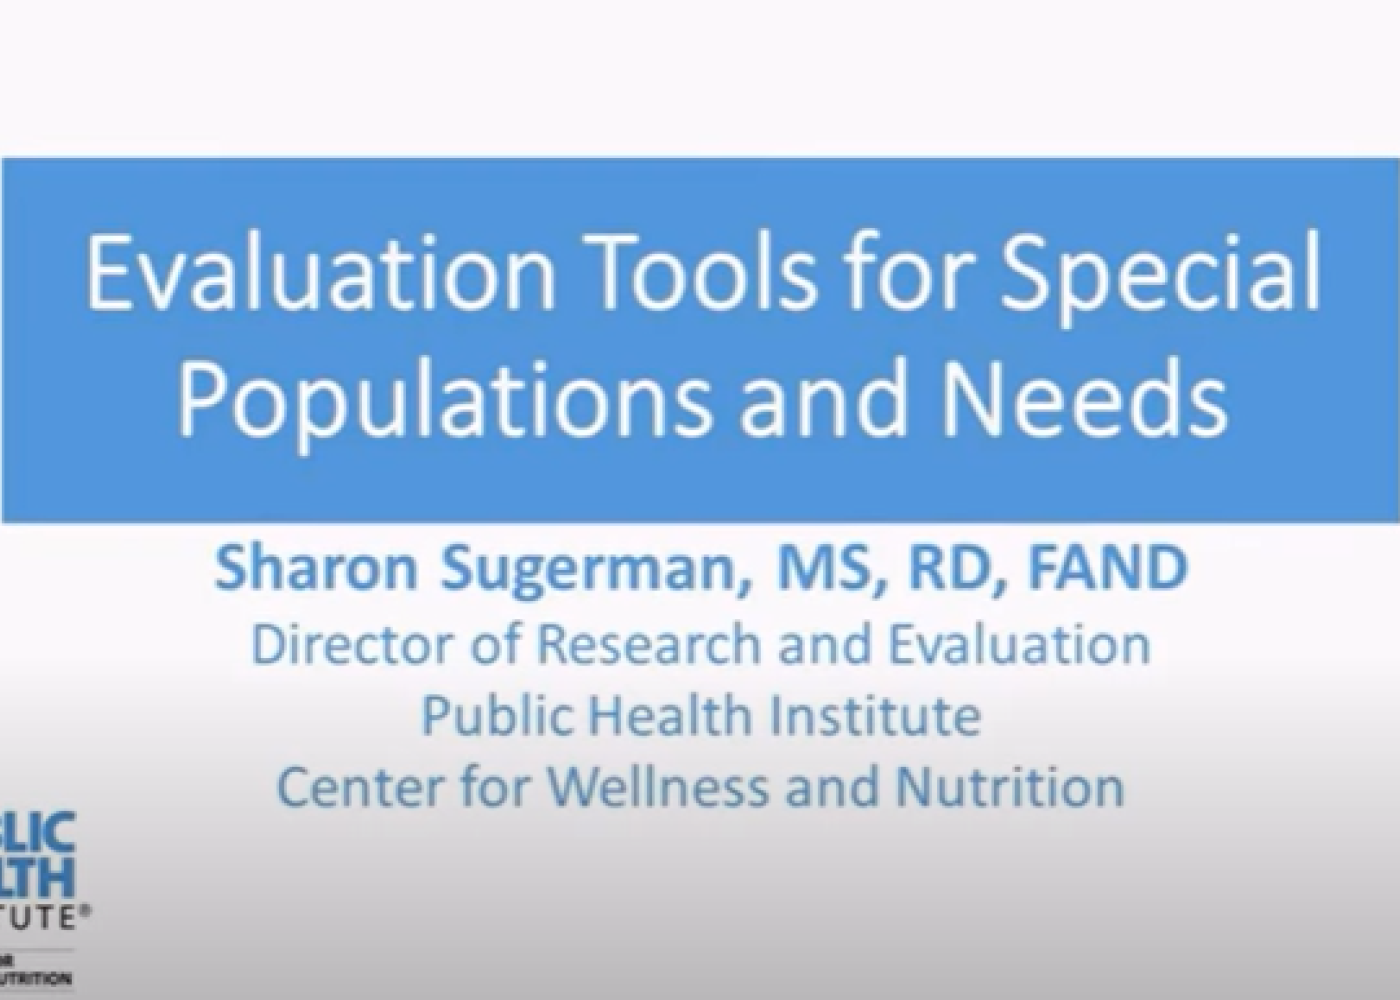 Evaluation Tools for Special Populations and Needs Sharon Sugerman, MS, RD, FAND Director of Research and Evaluation Public Health Institute Center for Wellness and Nutrition